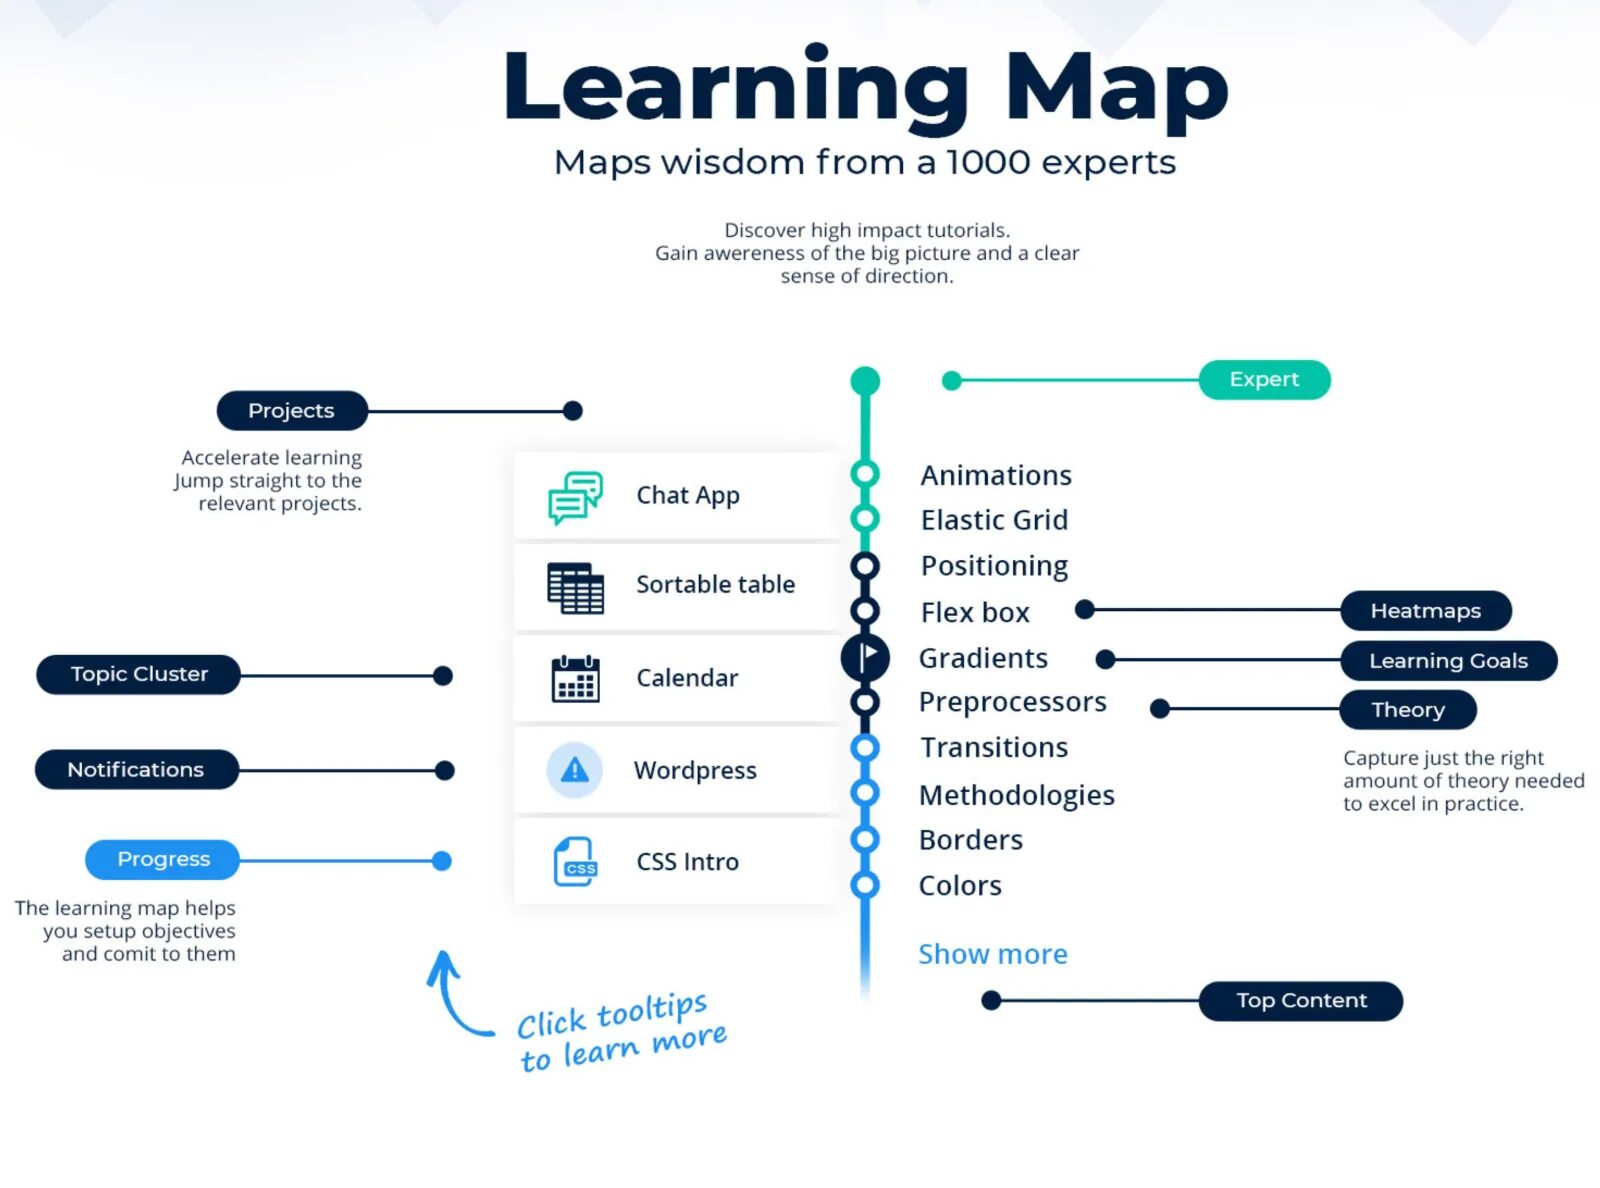 Learning maps. Learning Map. Функция Map. Learning Map на русском. Learning Map r.